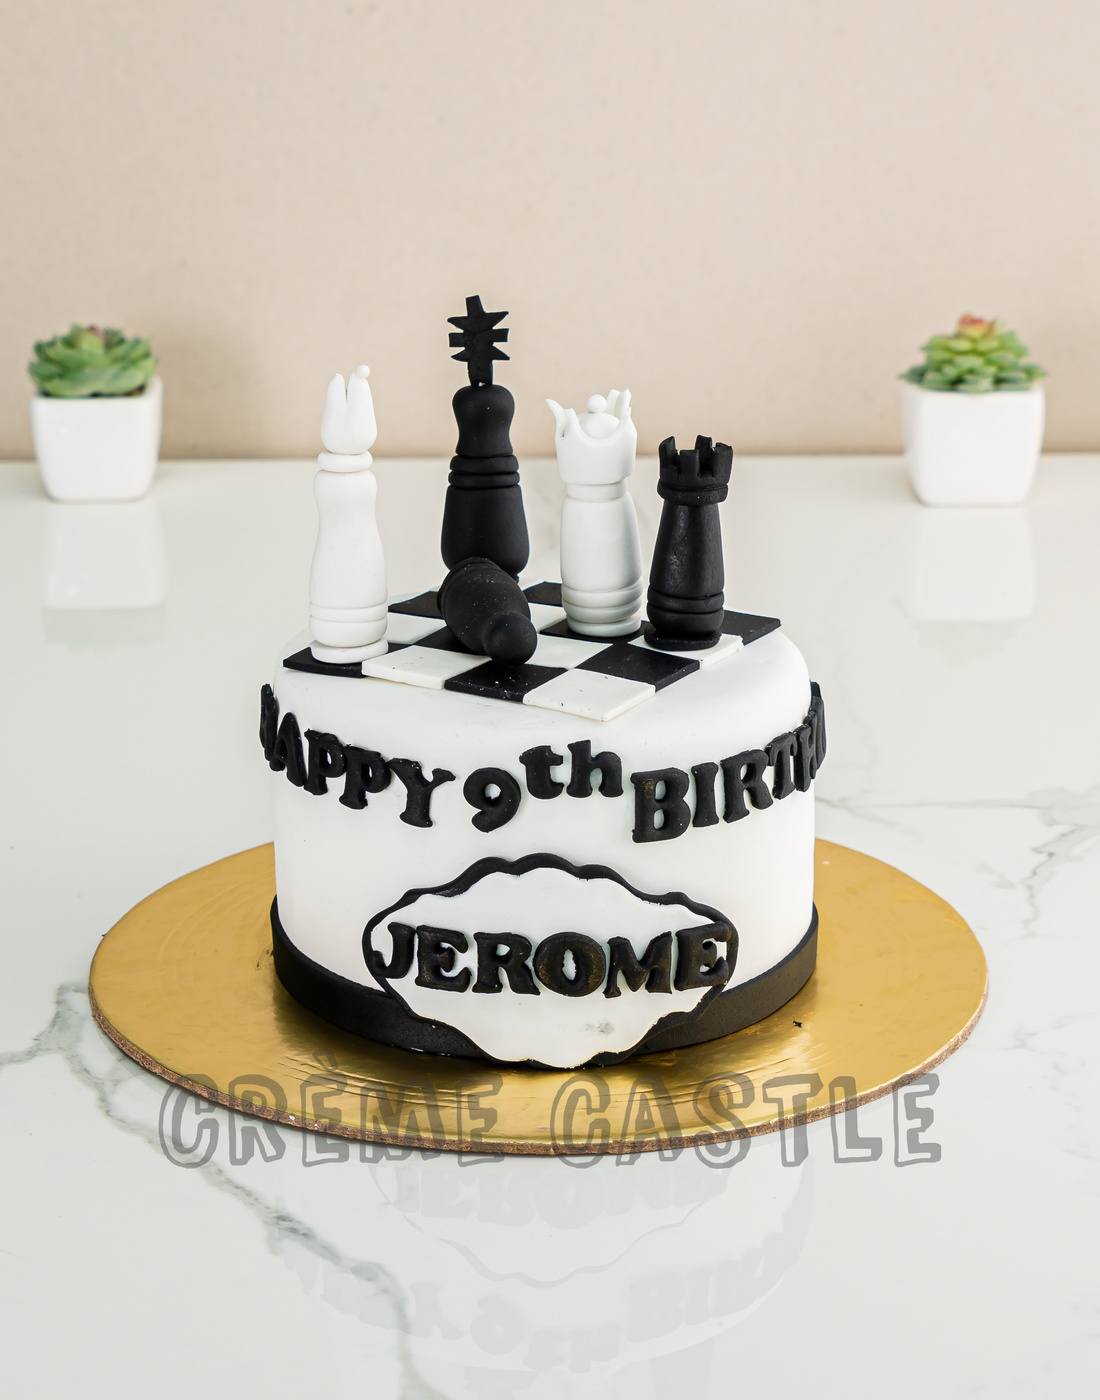 PRE-CUT CHESS PIECES EDIBLE RICE/WAFER PAPER CUP CAKE TOPPERS BIRTHDAY  PARTY DECORATIONS : Amazon.co.uk: Grocery